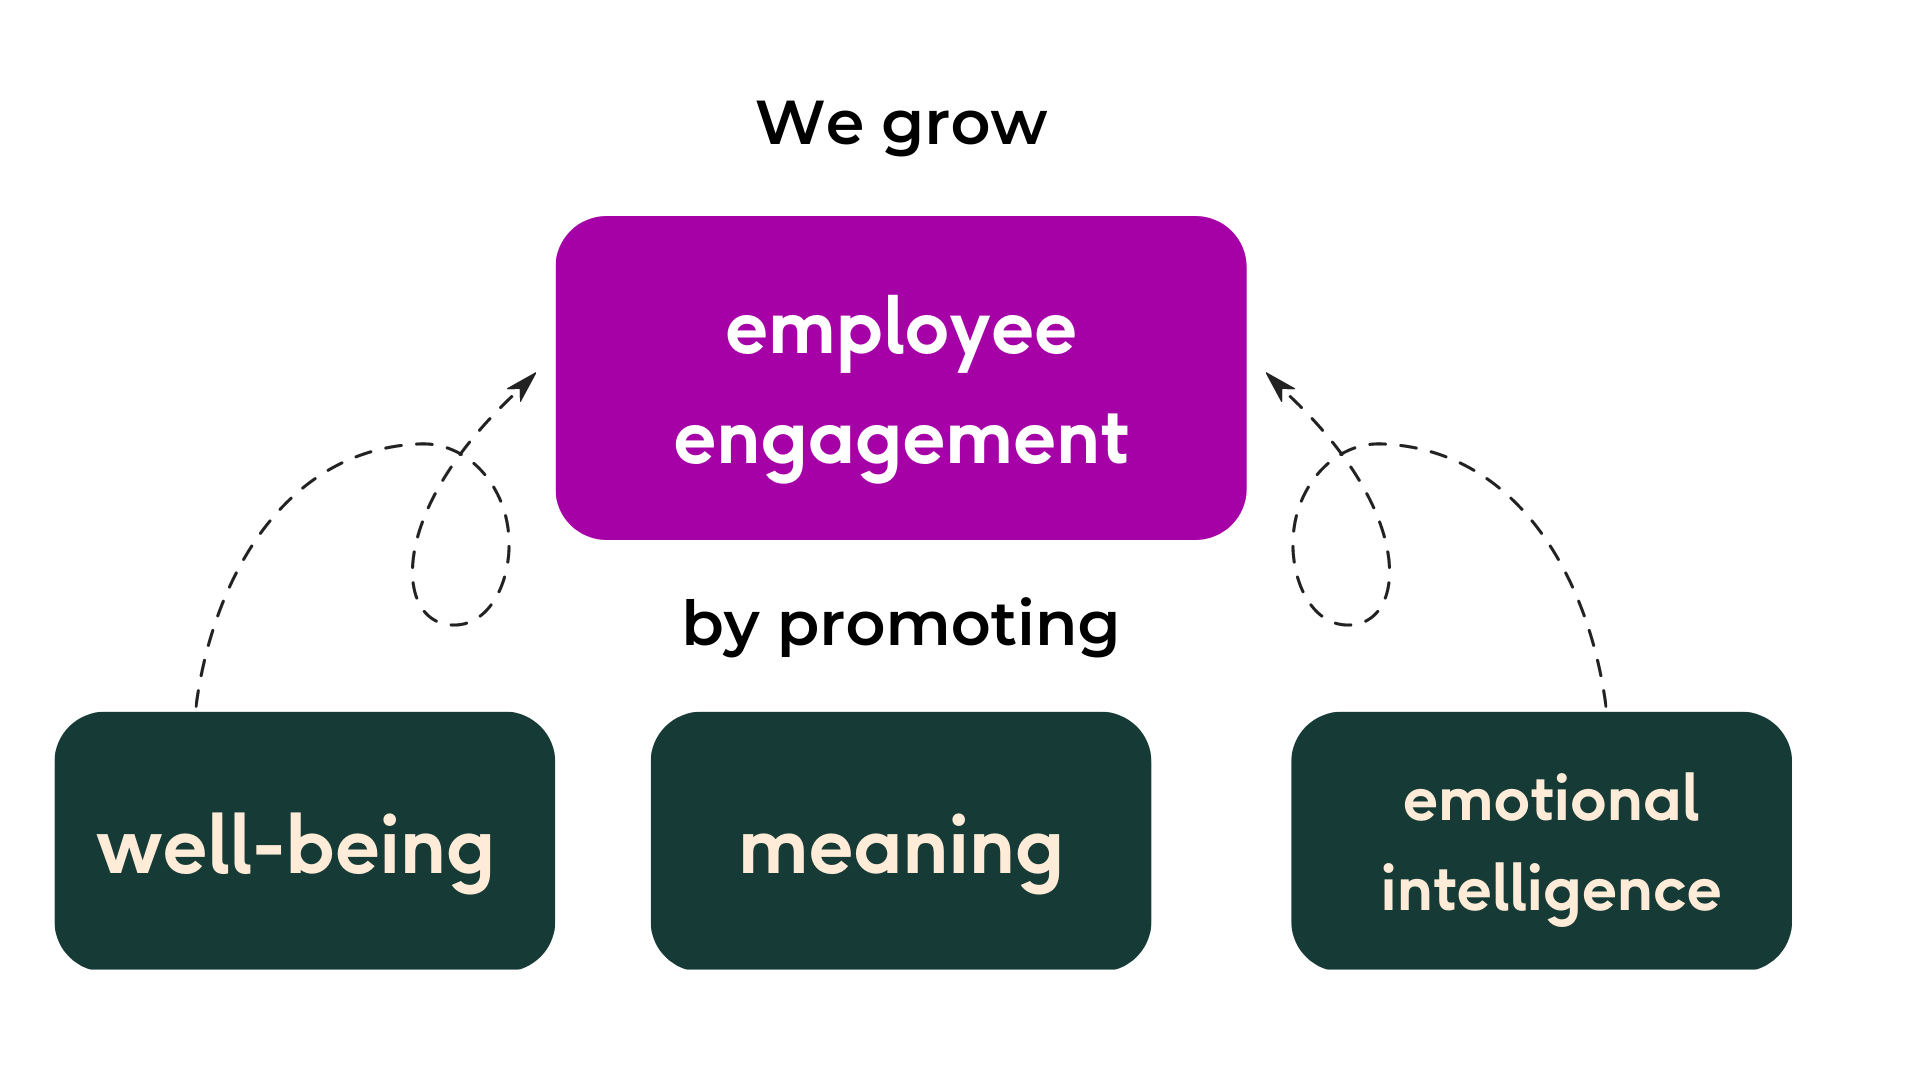 We grow employee engagement by promoting well-being, meaning, and emotional intelligence